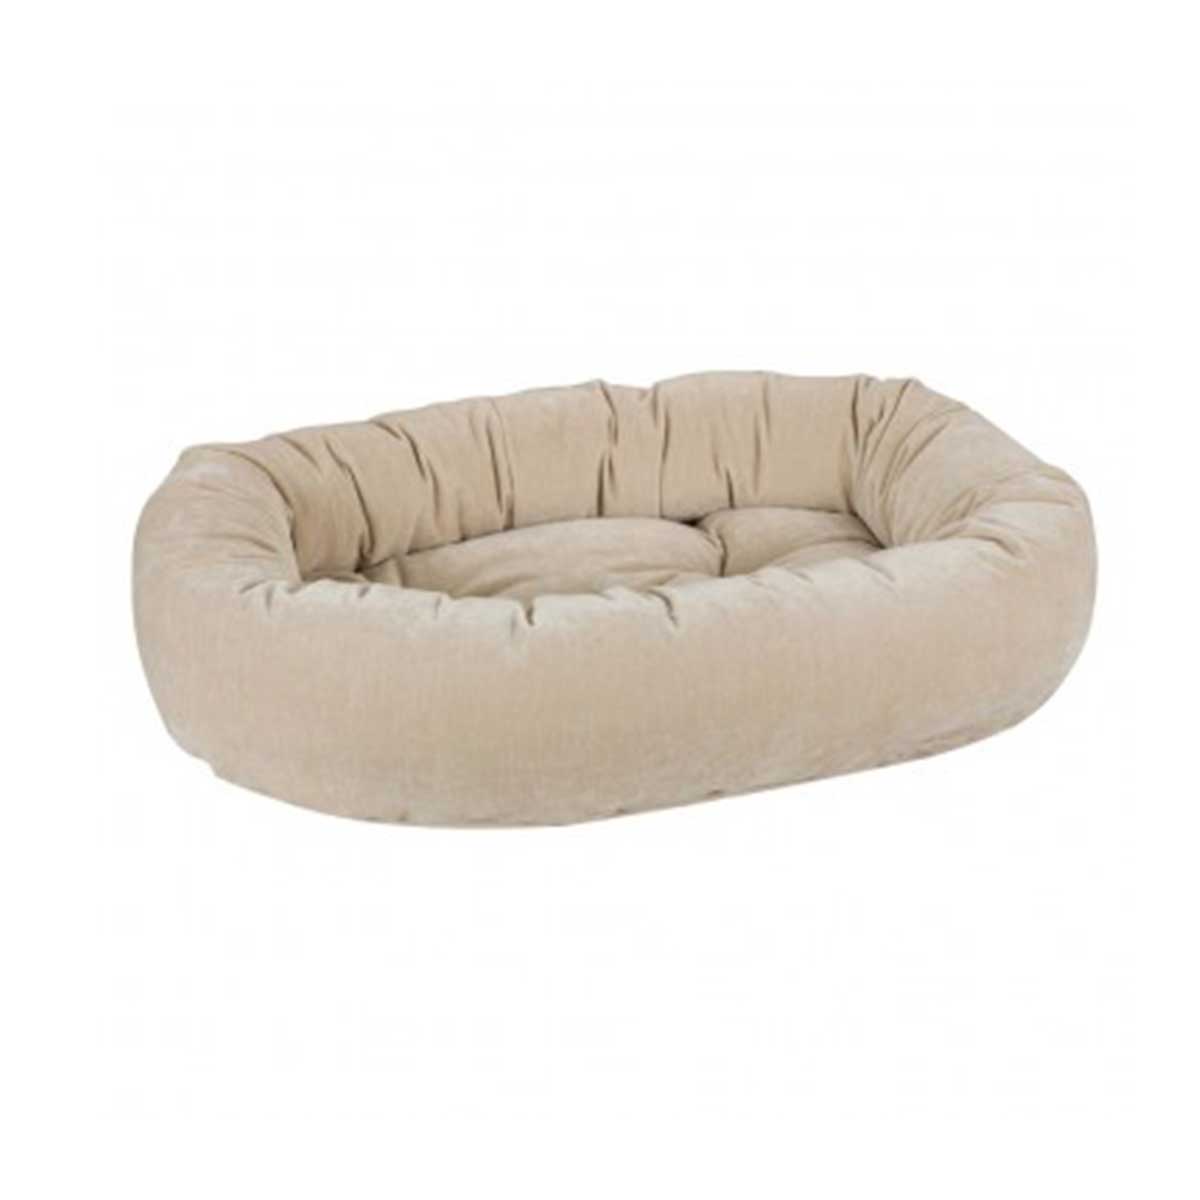 Donut Bed Linen Microvelvet Pet Bed | Pawlicious & Company